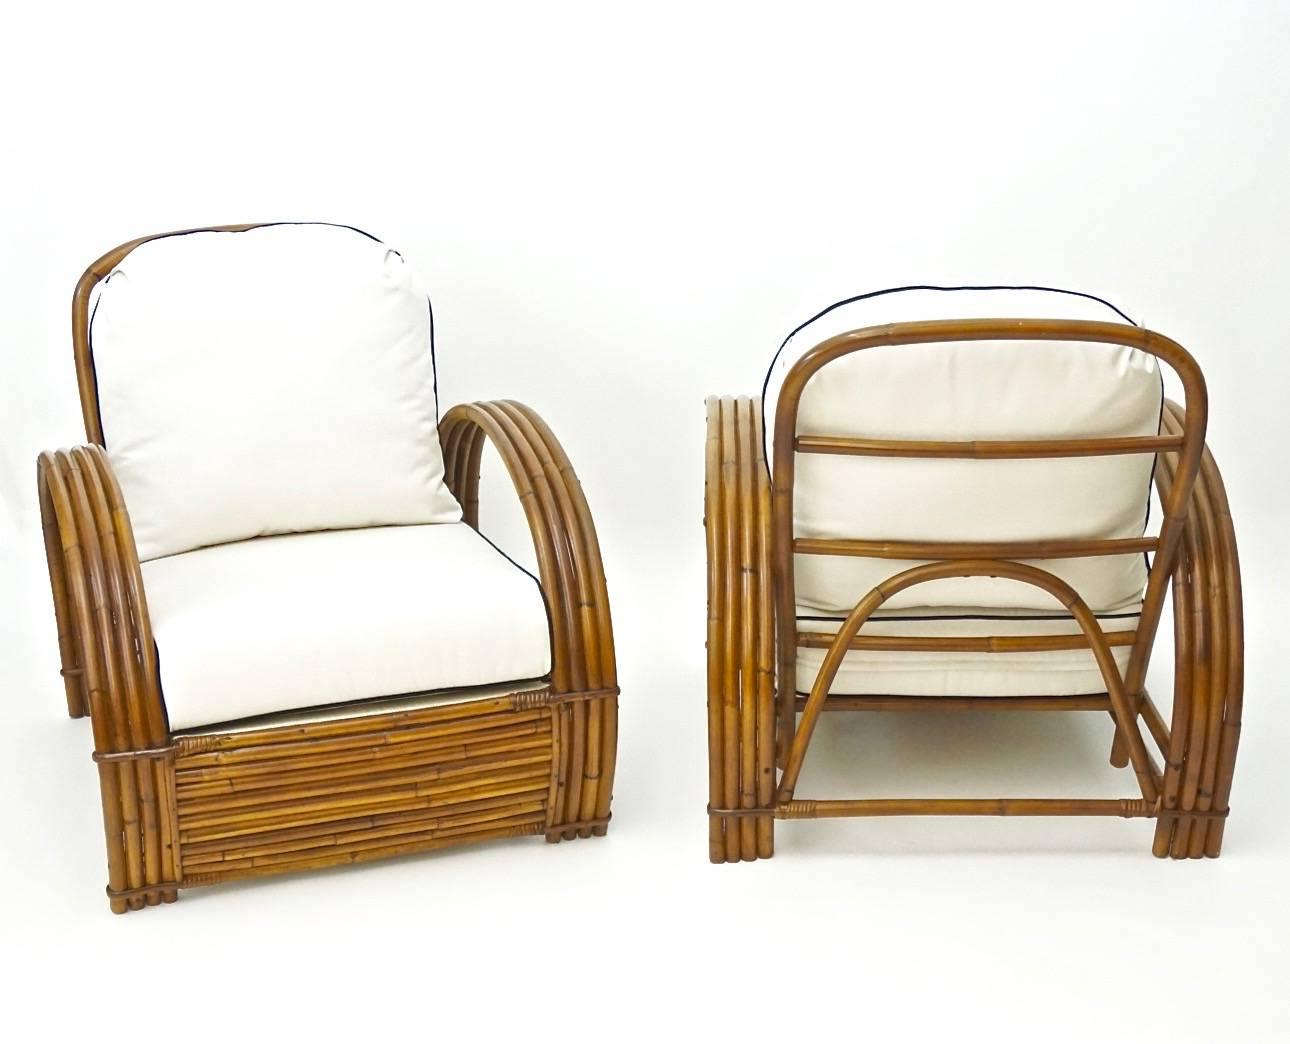 Pair of Rattan Lounge chairs and Ottoman with new-made Sunbrella Fabric cushions. Creme with black piping. Indoor/outdoor fabric.

20% OFF listed prices on all our items Nov. 1-30.